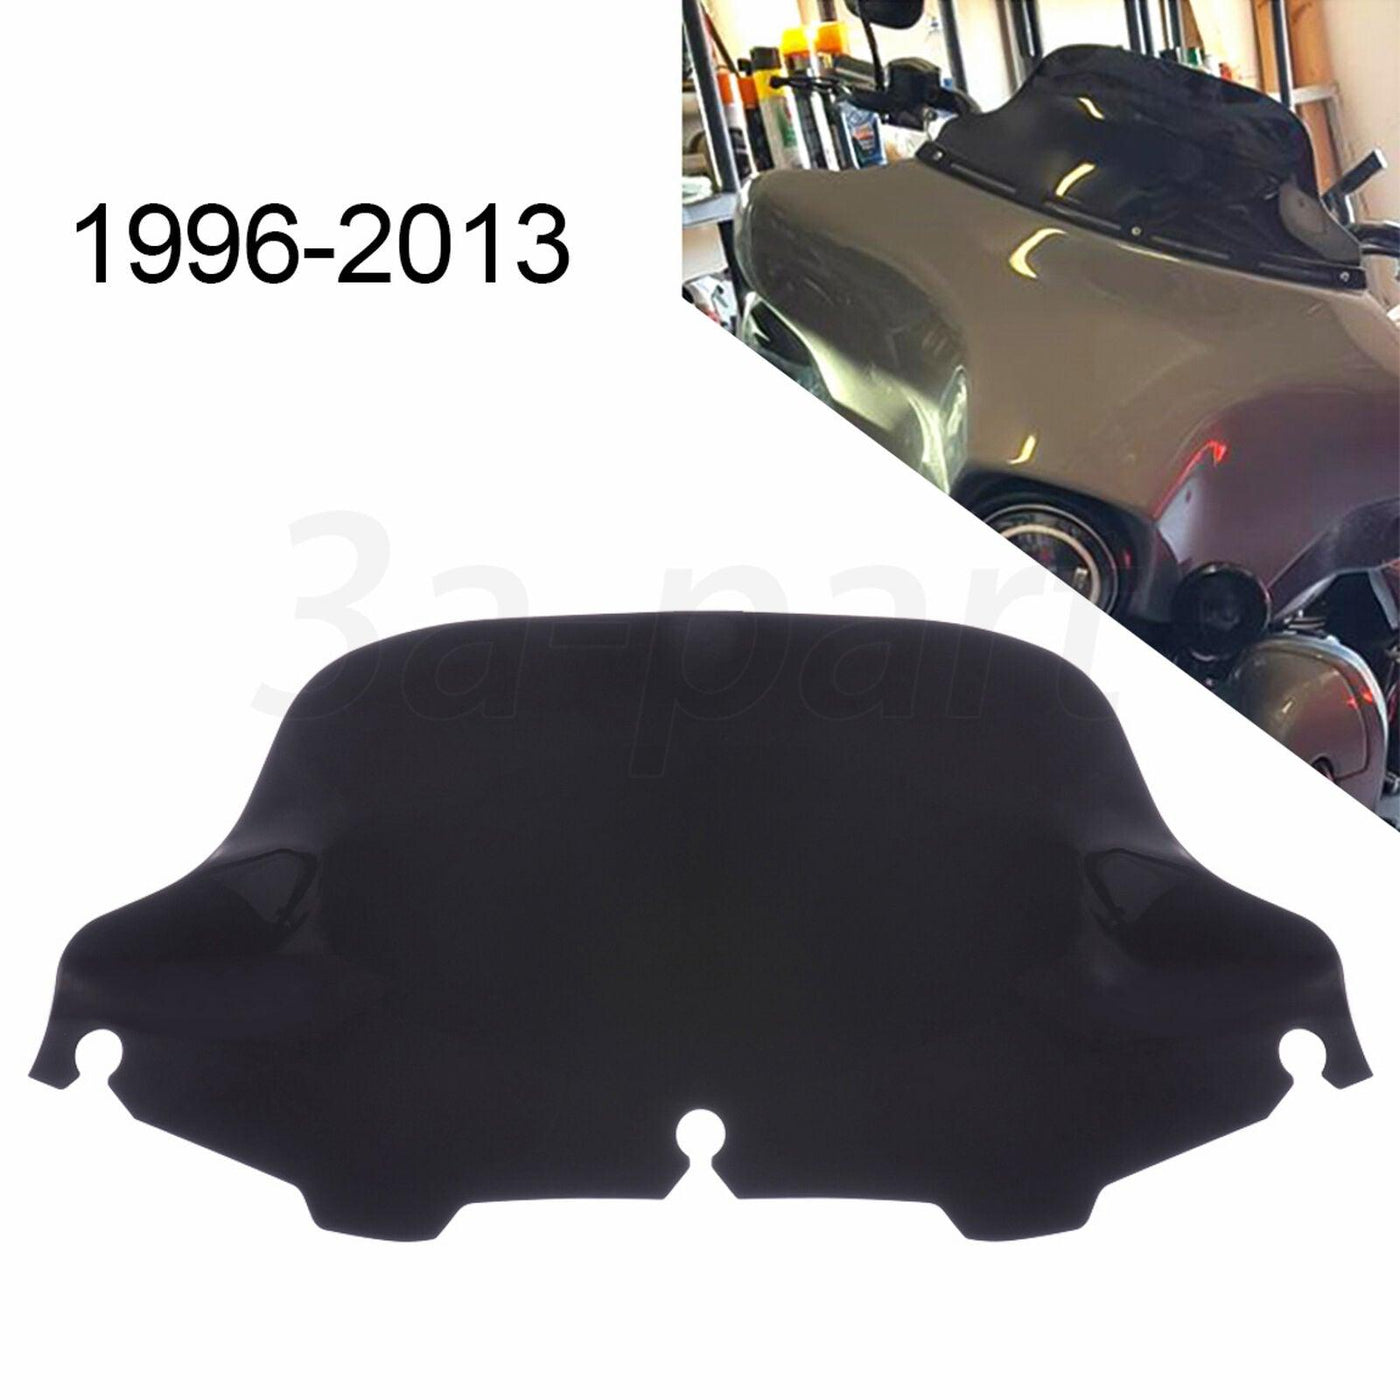 8" Black Wave Windsheild Windscreen Fit for Harley Touring Street Glide 1996-13 - Moto Life Products